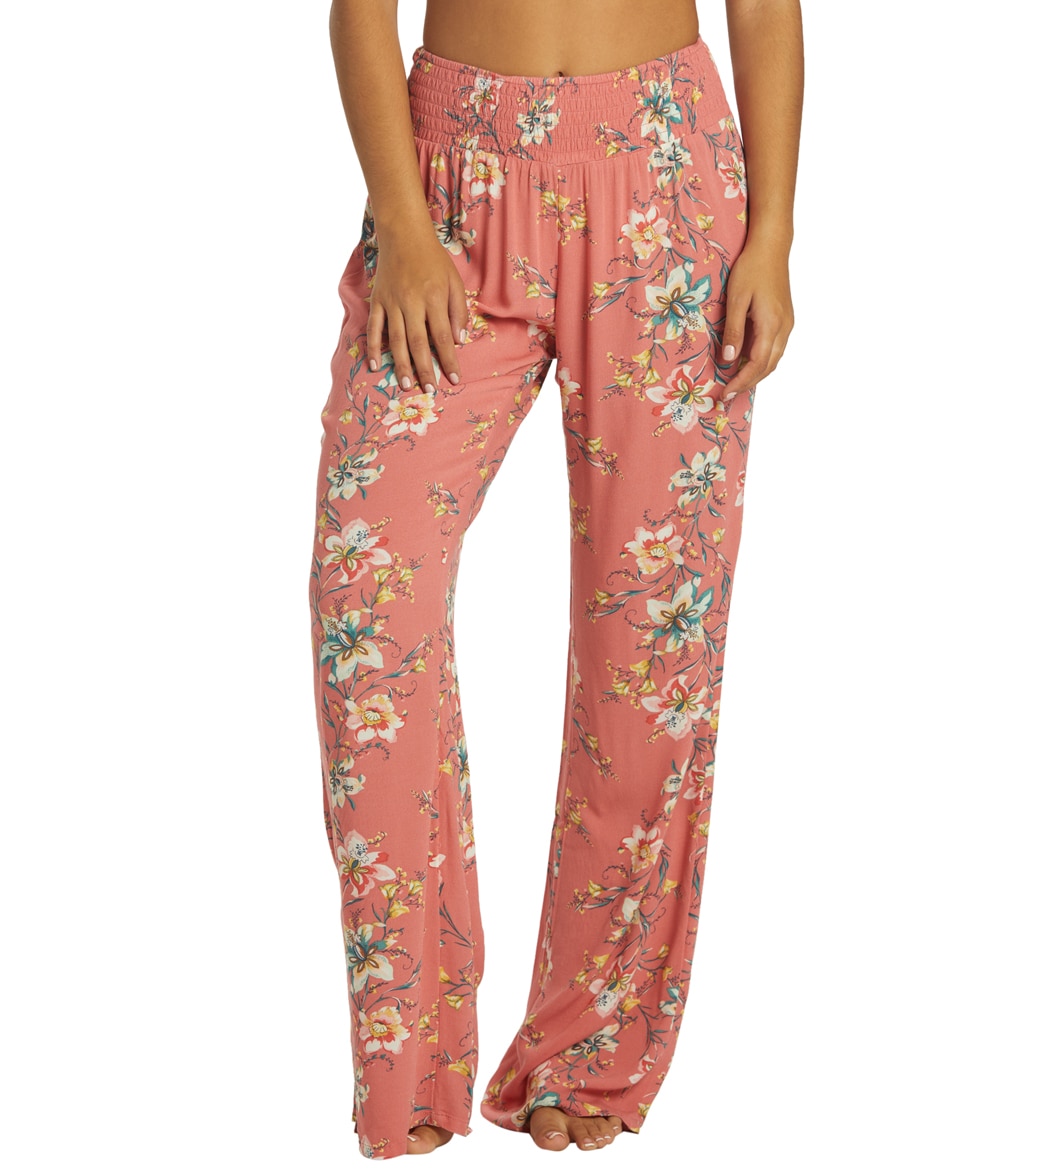 O'neill Women's Johnny Floral Woven Pants - Faded Rose Large - Swimoutlet.com